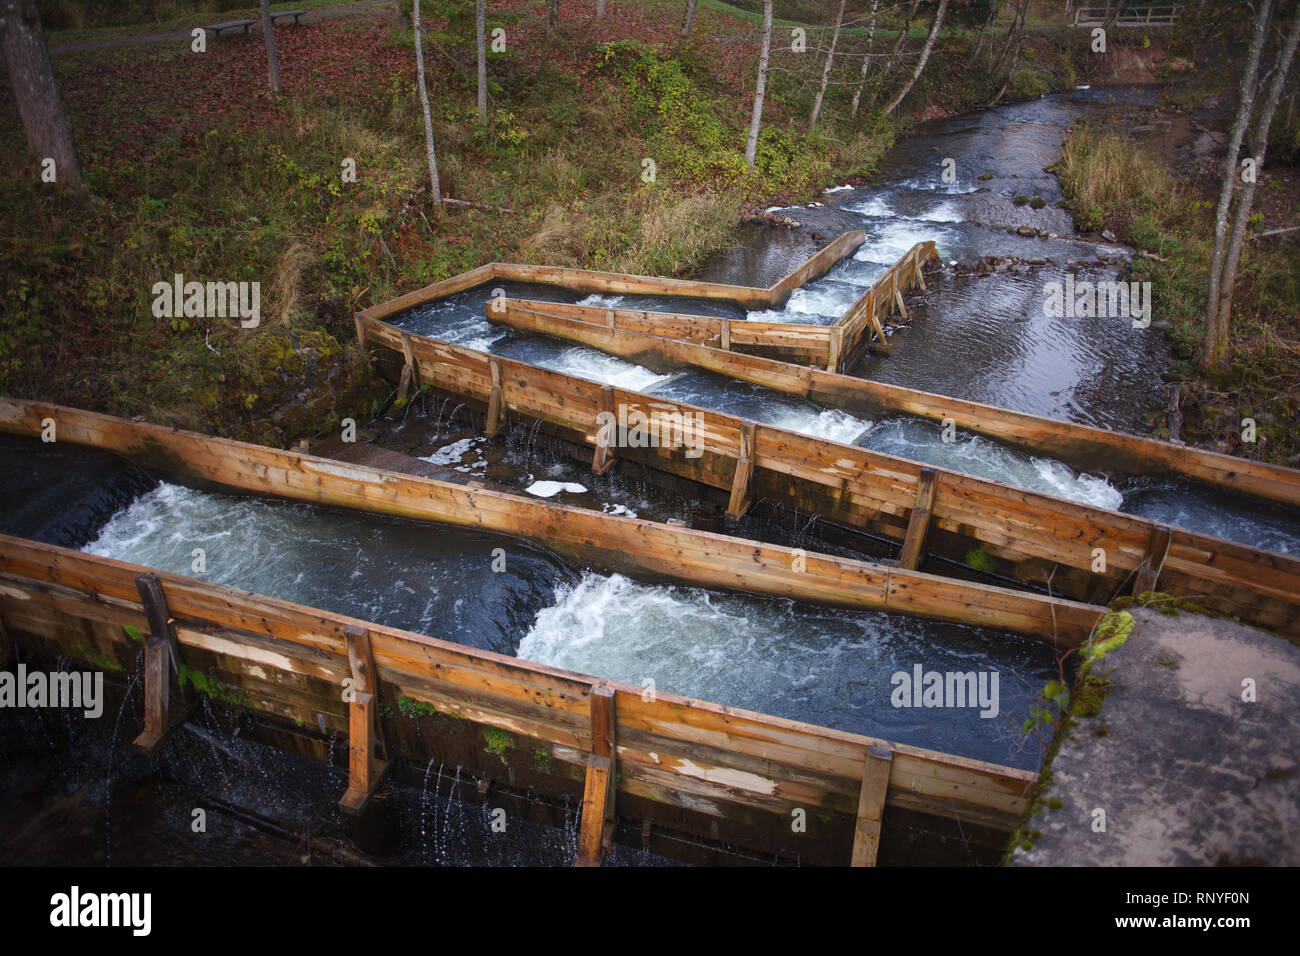 Fish ladders aid salmon on their upstream migration on small river Stock Photo